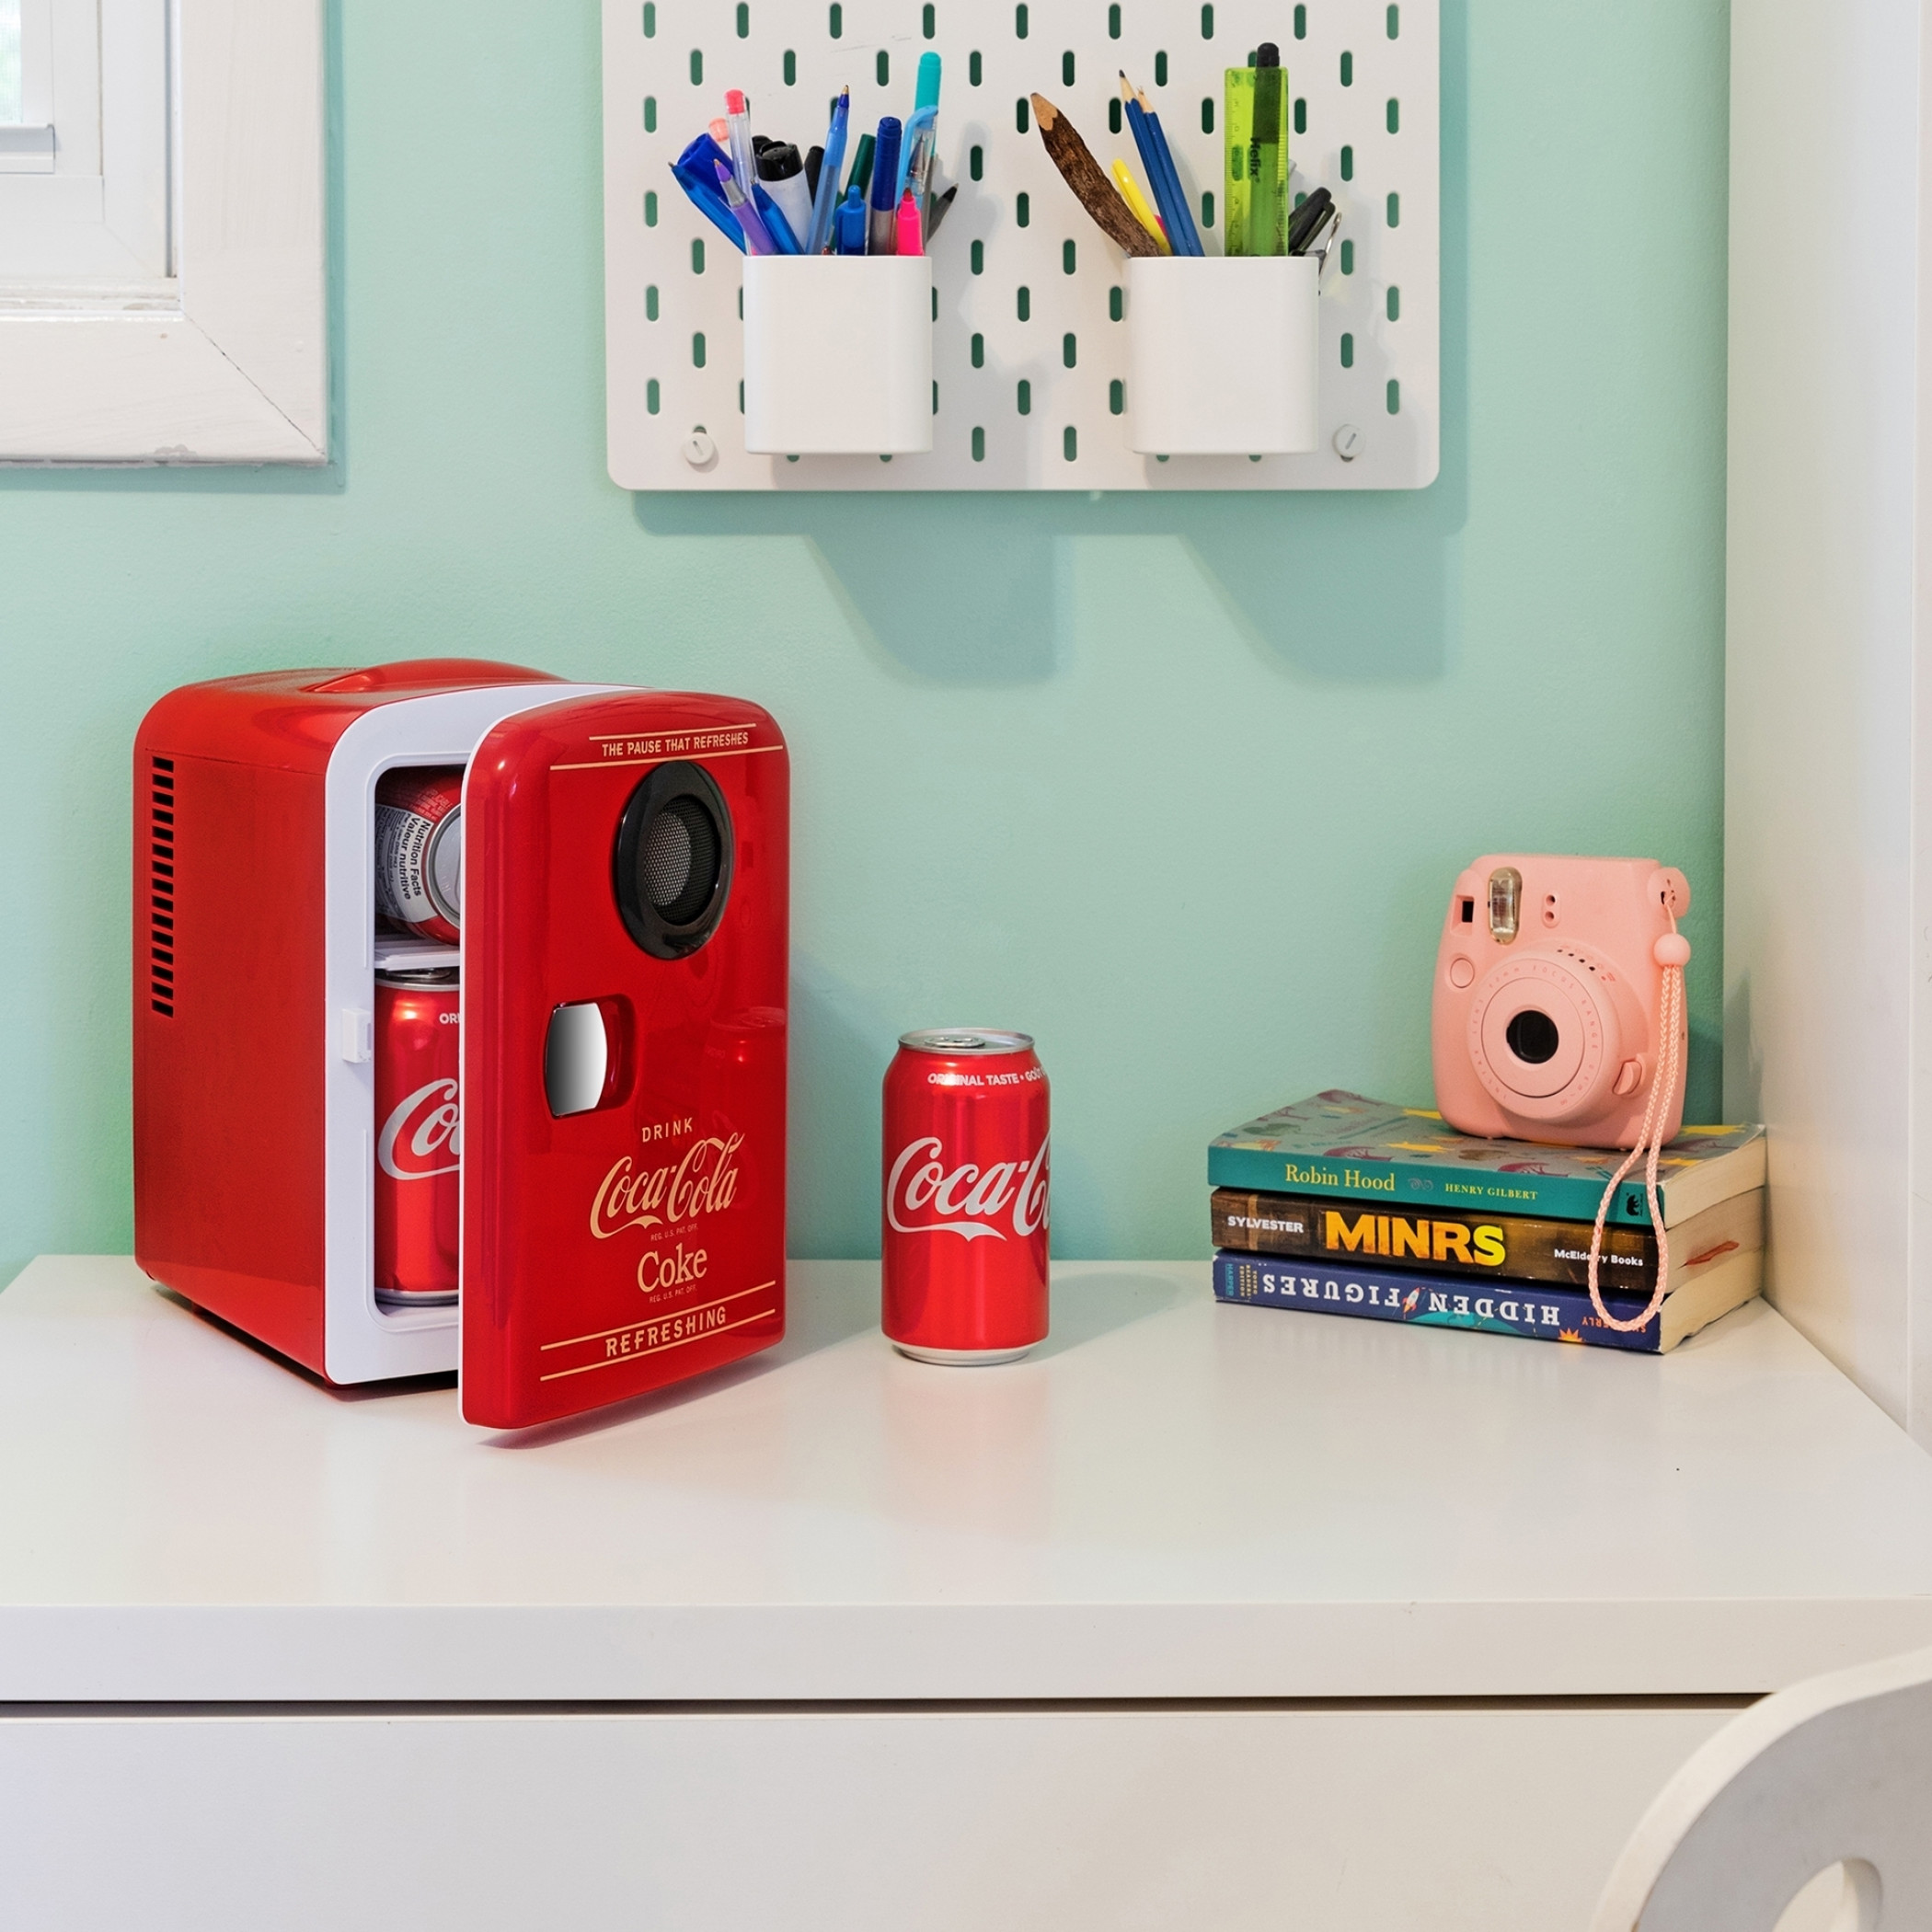 Coca-Cola's using Bluetooth to help you make personalized drinks